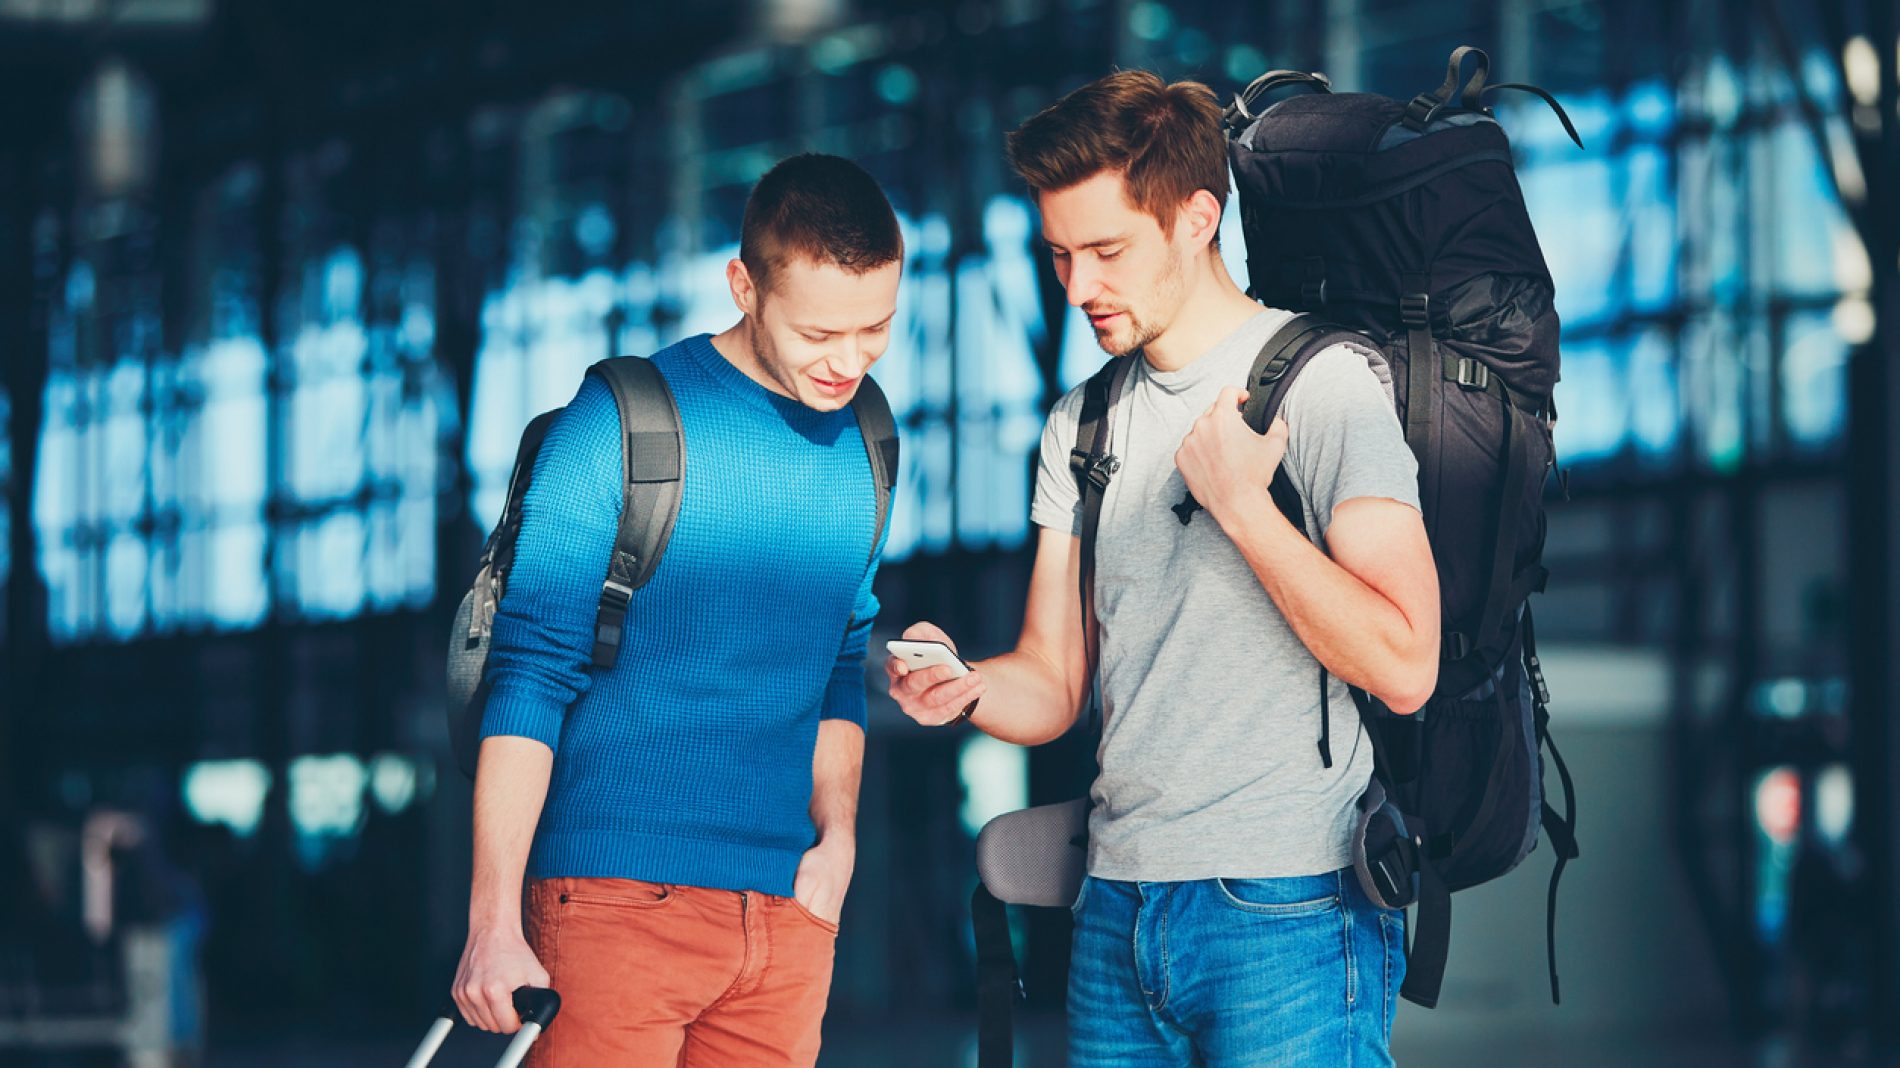 Two young men at the airport